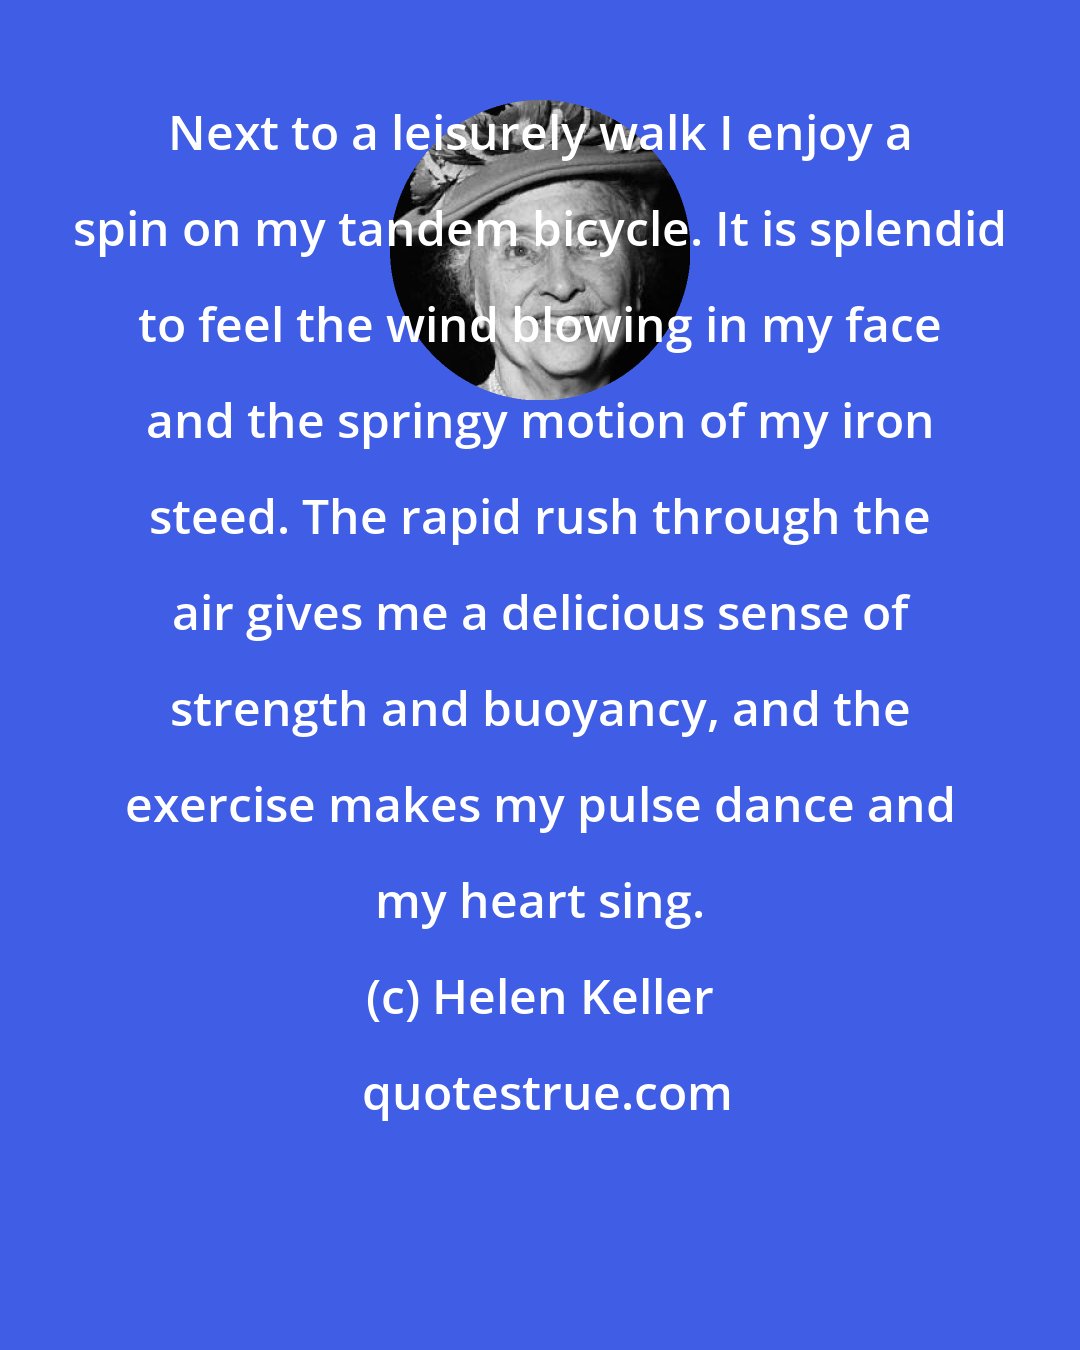 Helen Keller: Next to a leisurely walk I enjoy a spin on my tandem bicycle. It is splendid to feel the wind blowing in my face and the springy motion of my iron steed. The rapid rush through the air gives me a delicious sense of strength and buoyancy, and the exercise makes my pulse dance and my heart sing.